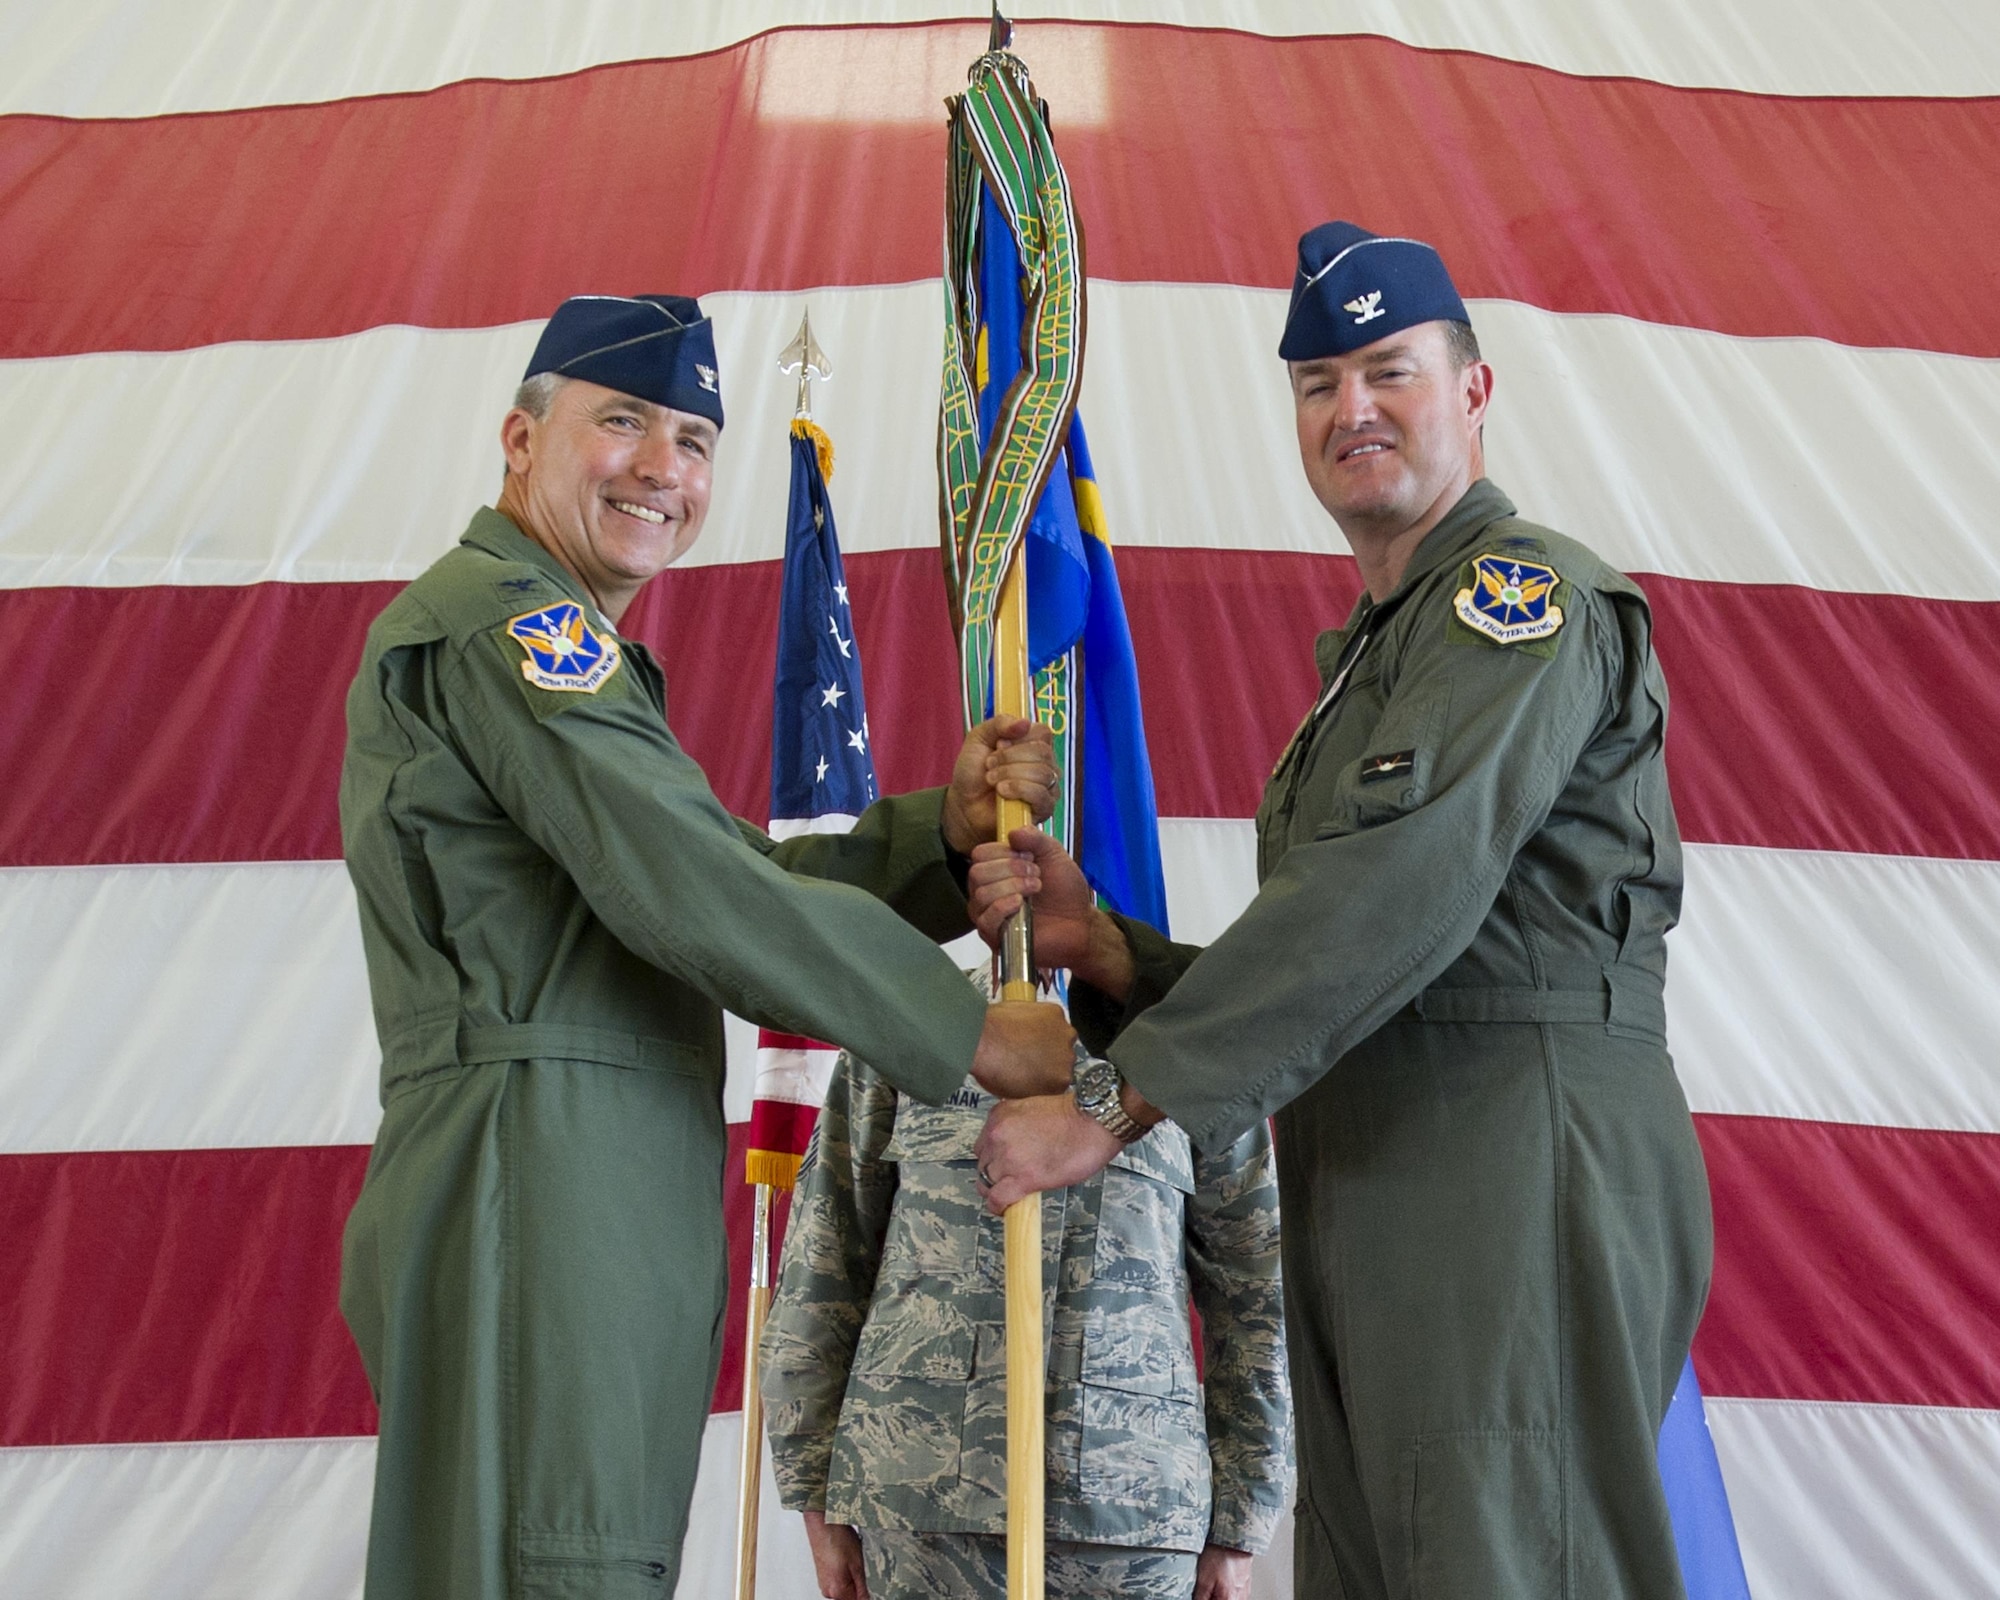 U.S. Air Force Col. John M. Breazeale, 301st Fighter Wing commander (left), presents the 44th Fighter Group guidon to its new commander, Col. Randall W. Cason during the 44th Fighter Group Change of Command Ceremony at Tyndall Air Force Base July 9. Cason was the commander of the 301st Fighter Squadron before taking the helm of the 44th FG. The 44th FG accomplishes Total Force Integration providing pilots, maintainers and support personnel in partnership with the 325th Fighter Wing to execute the Tyndall mission to train and project unrivaled combat air power. (U.S. Air Force photo by Senior Airman Alex Fox Echols III/Released)